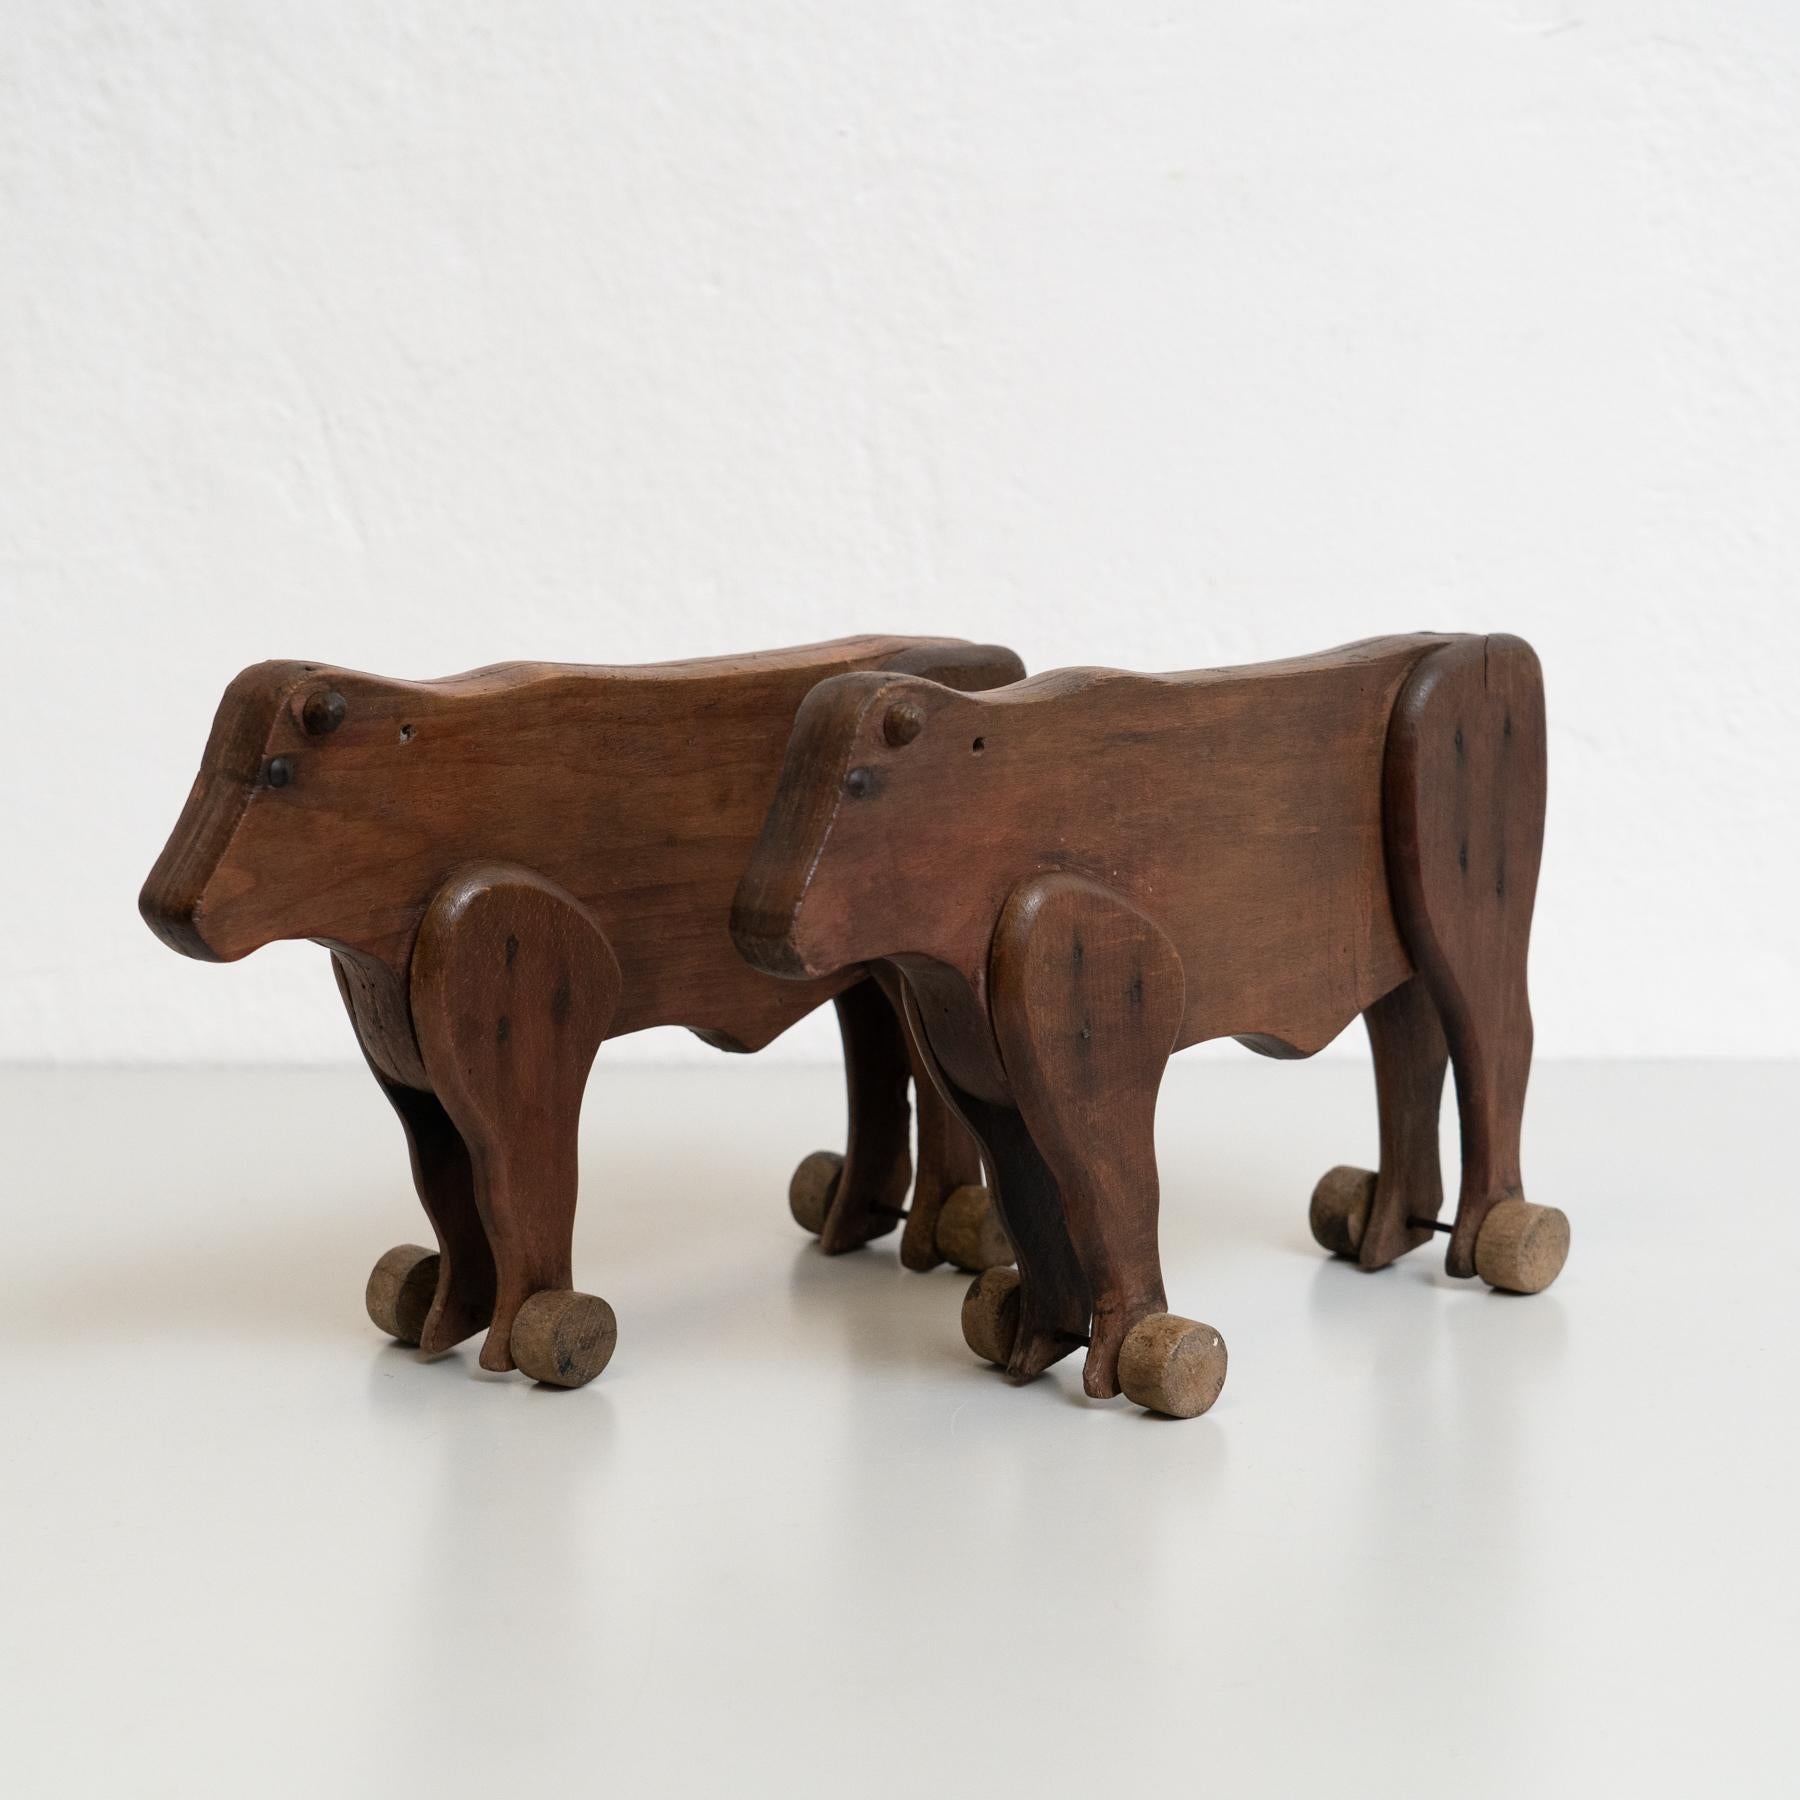 Set of Two Early 20th Century Rustic Traditional Wood Cow Sculptures.
Manufactured in France.

In original condition with minor wear consistent of age and use, preserving a beautiful patina.